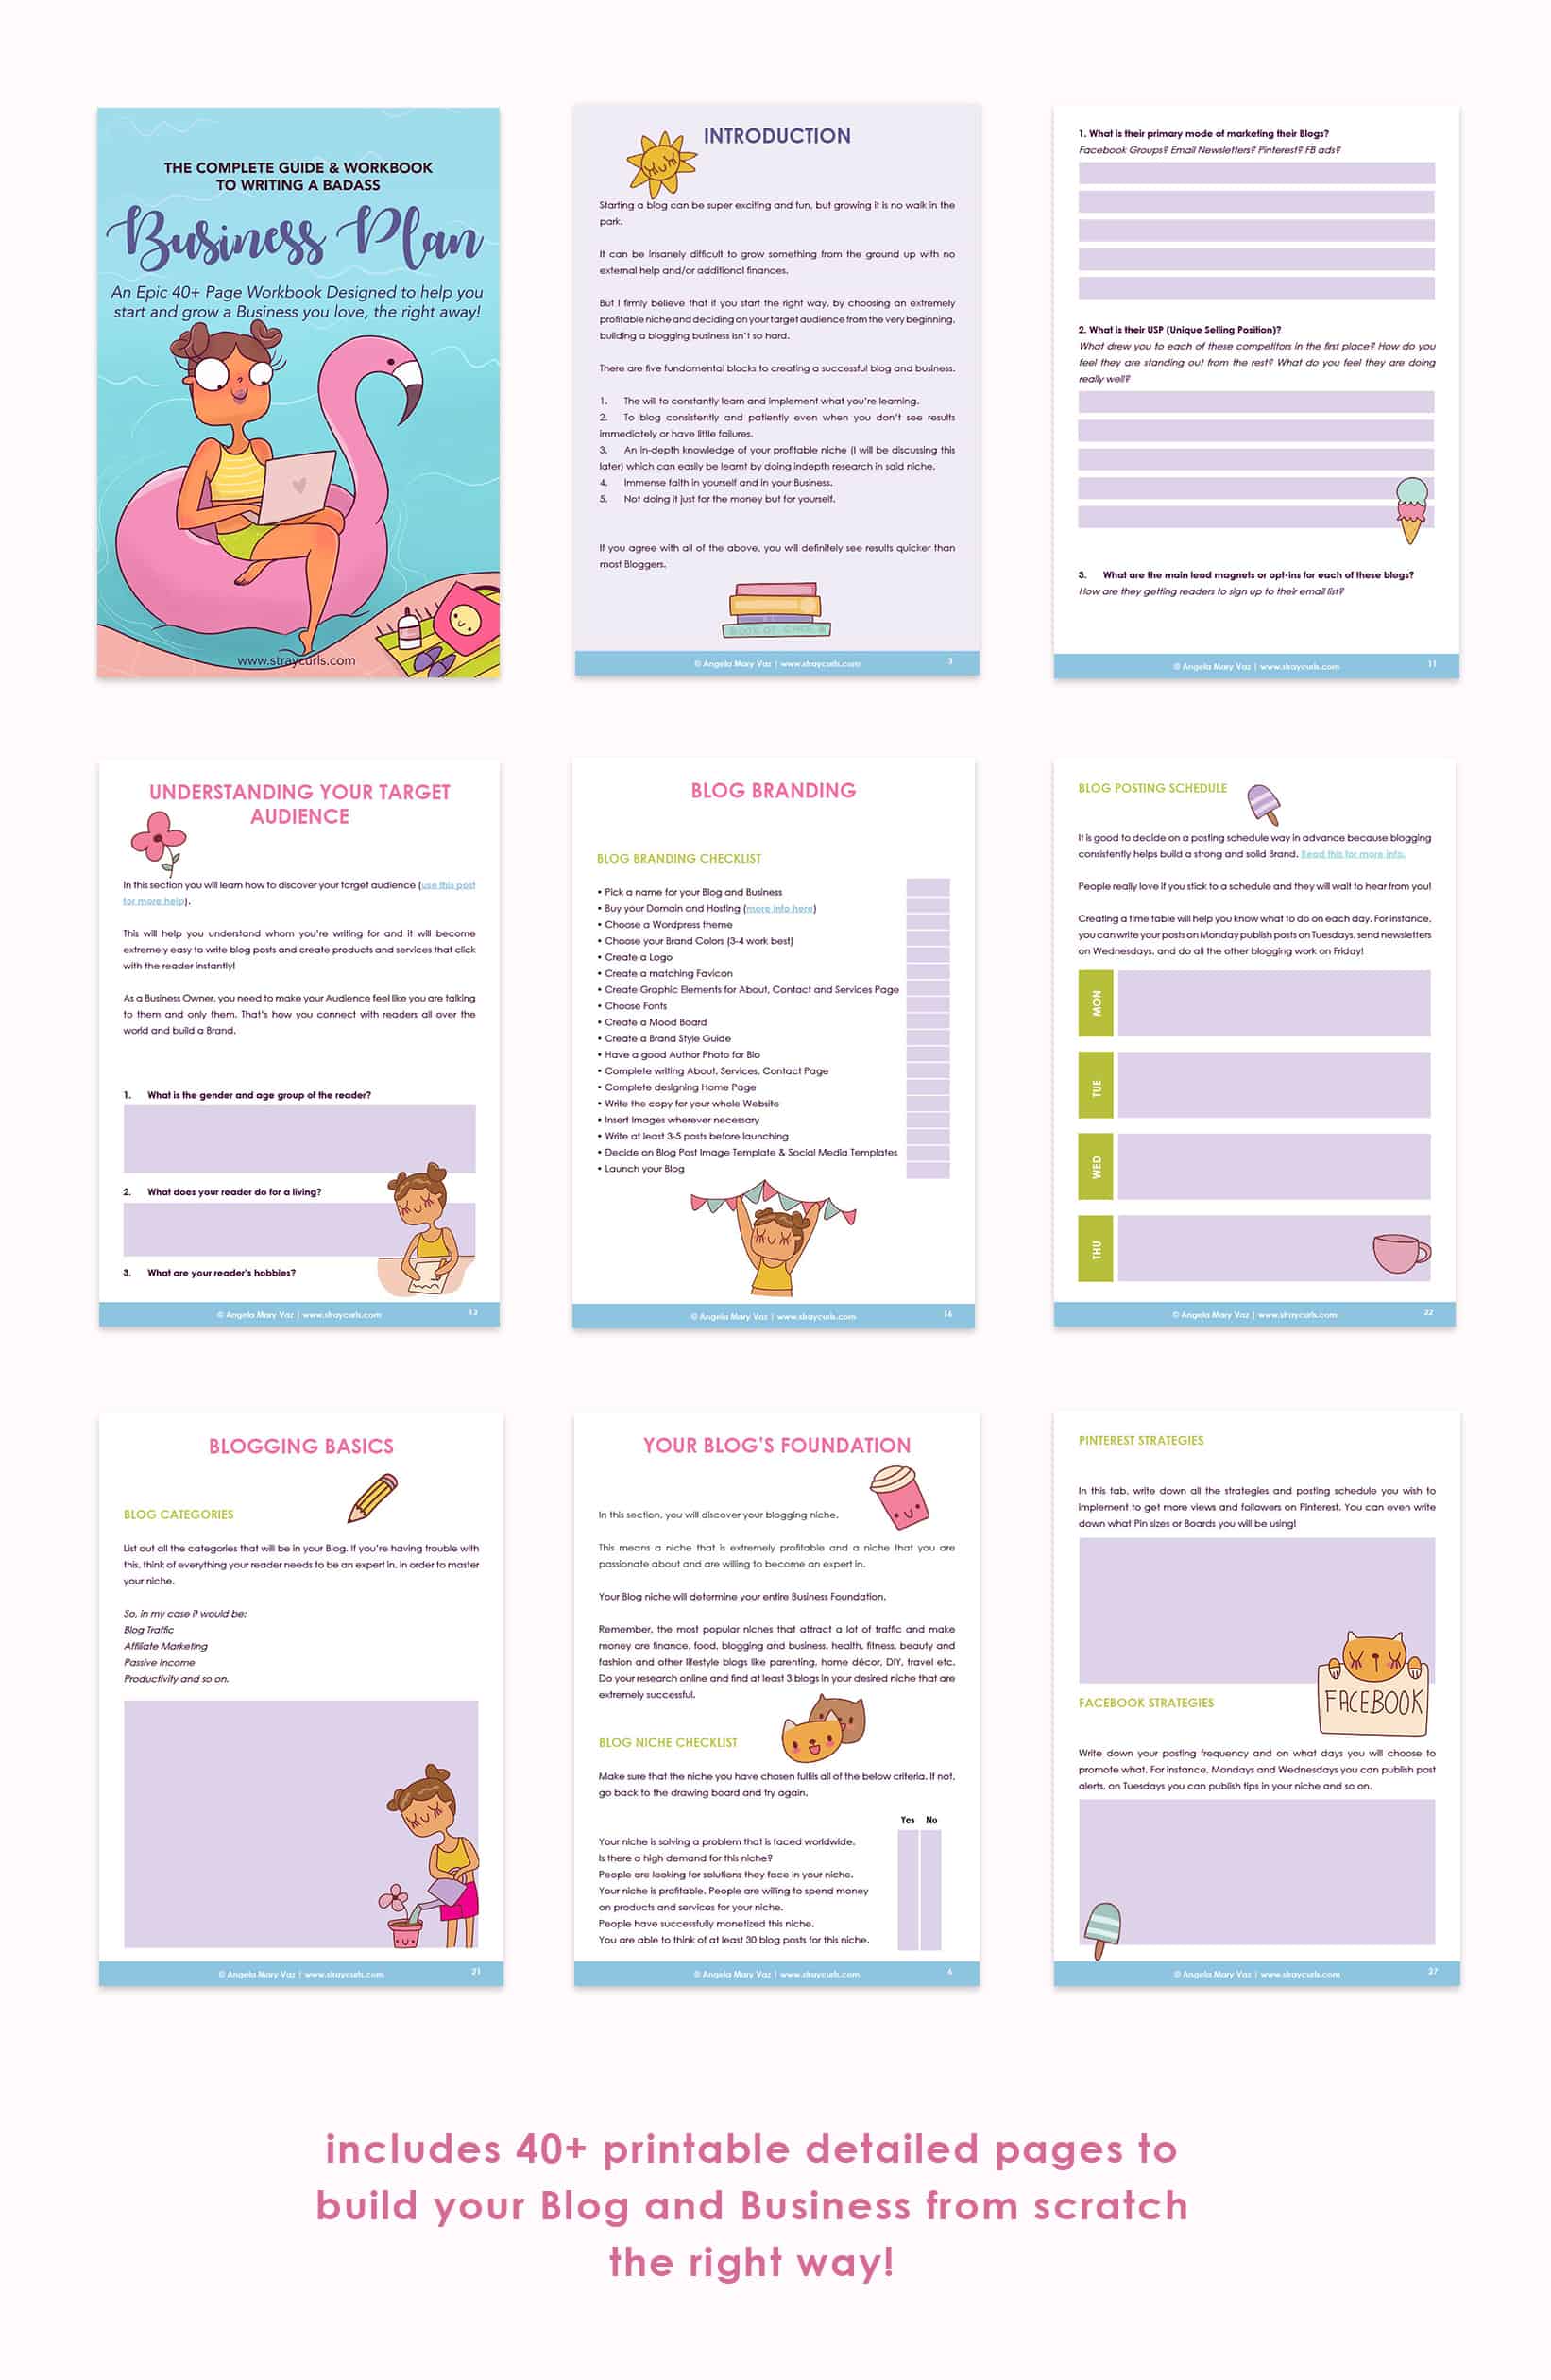 These include pages with cute stickers to help you with your blog brand, plan your social media and email marketing, monetization strategies and so much more!